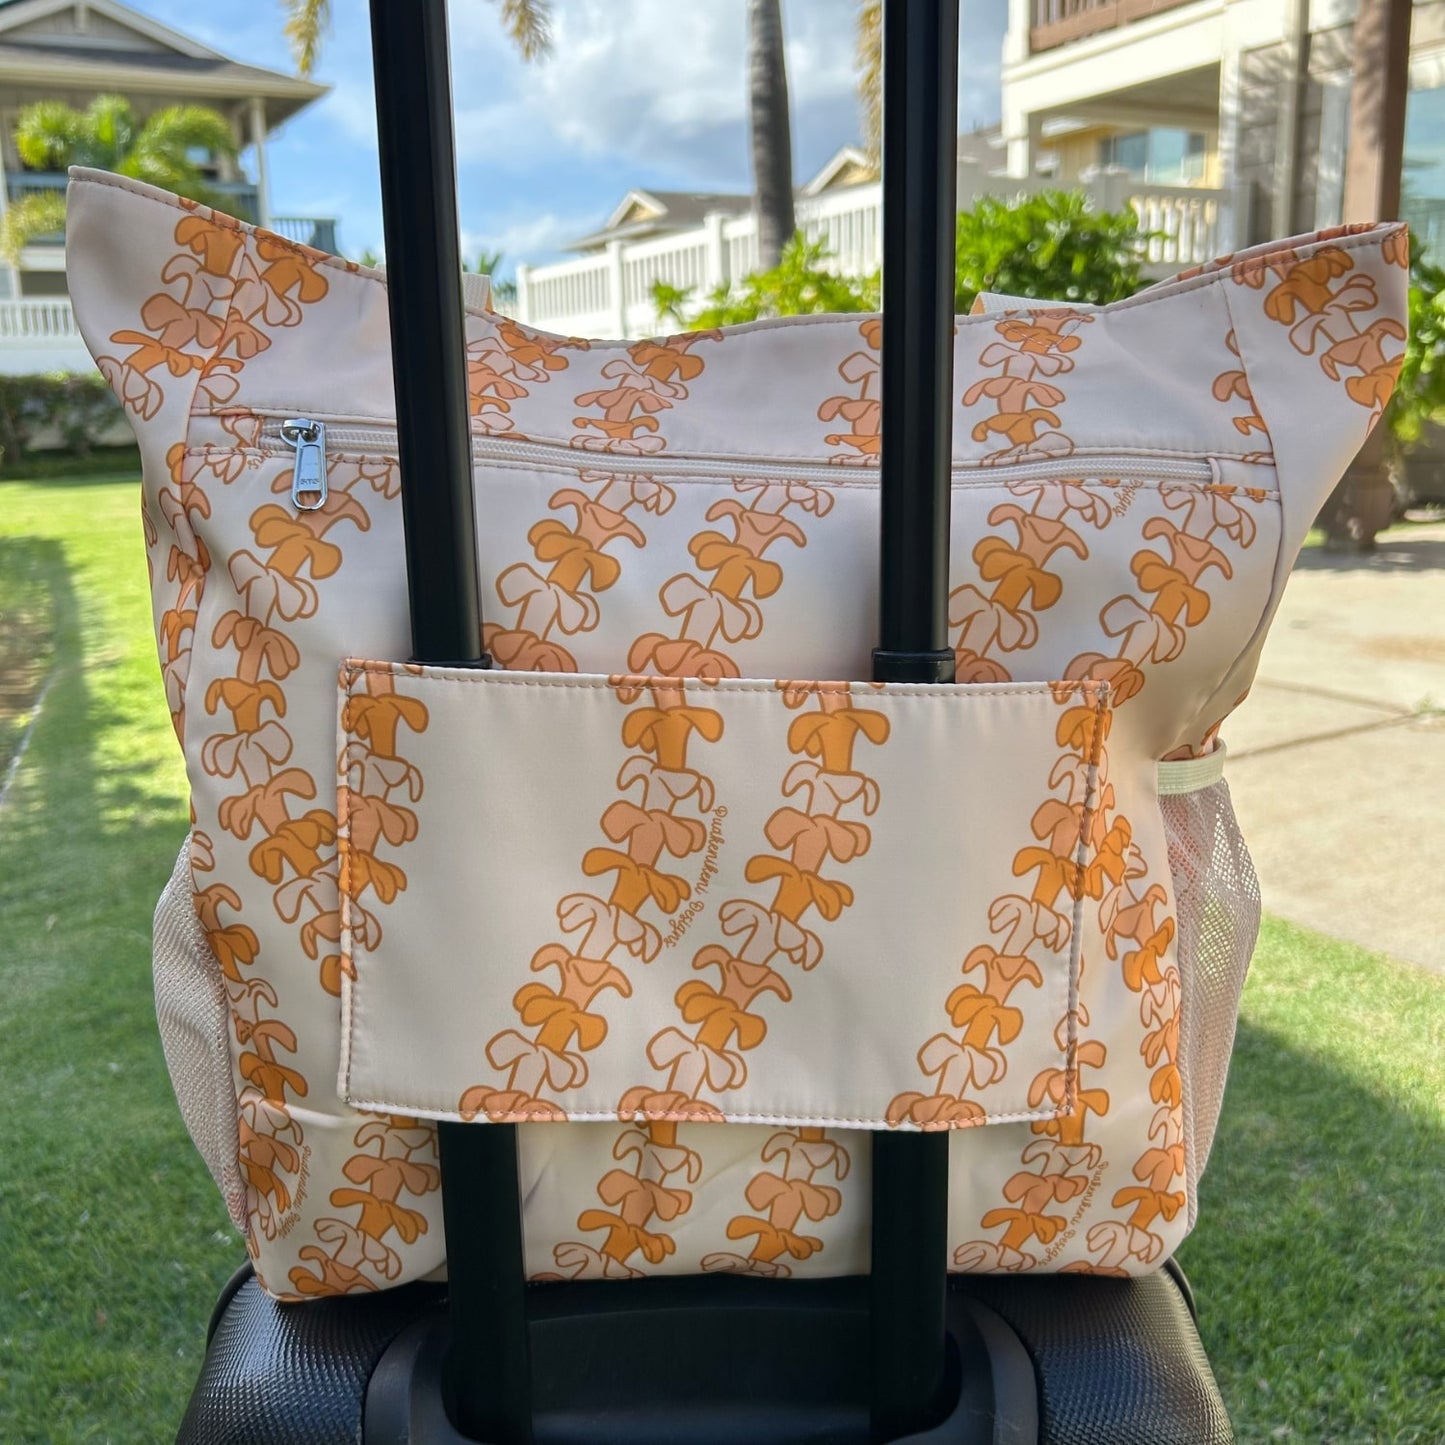 Travelers set including best selling Holoholo Bag in Kaulua Light and Large Canvas Zipper Pouch - from Puakenikeni Designs - on rolling luggage carry-on showing back panel for travel